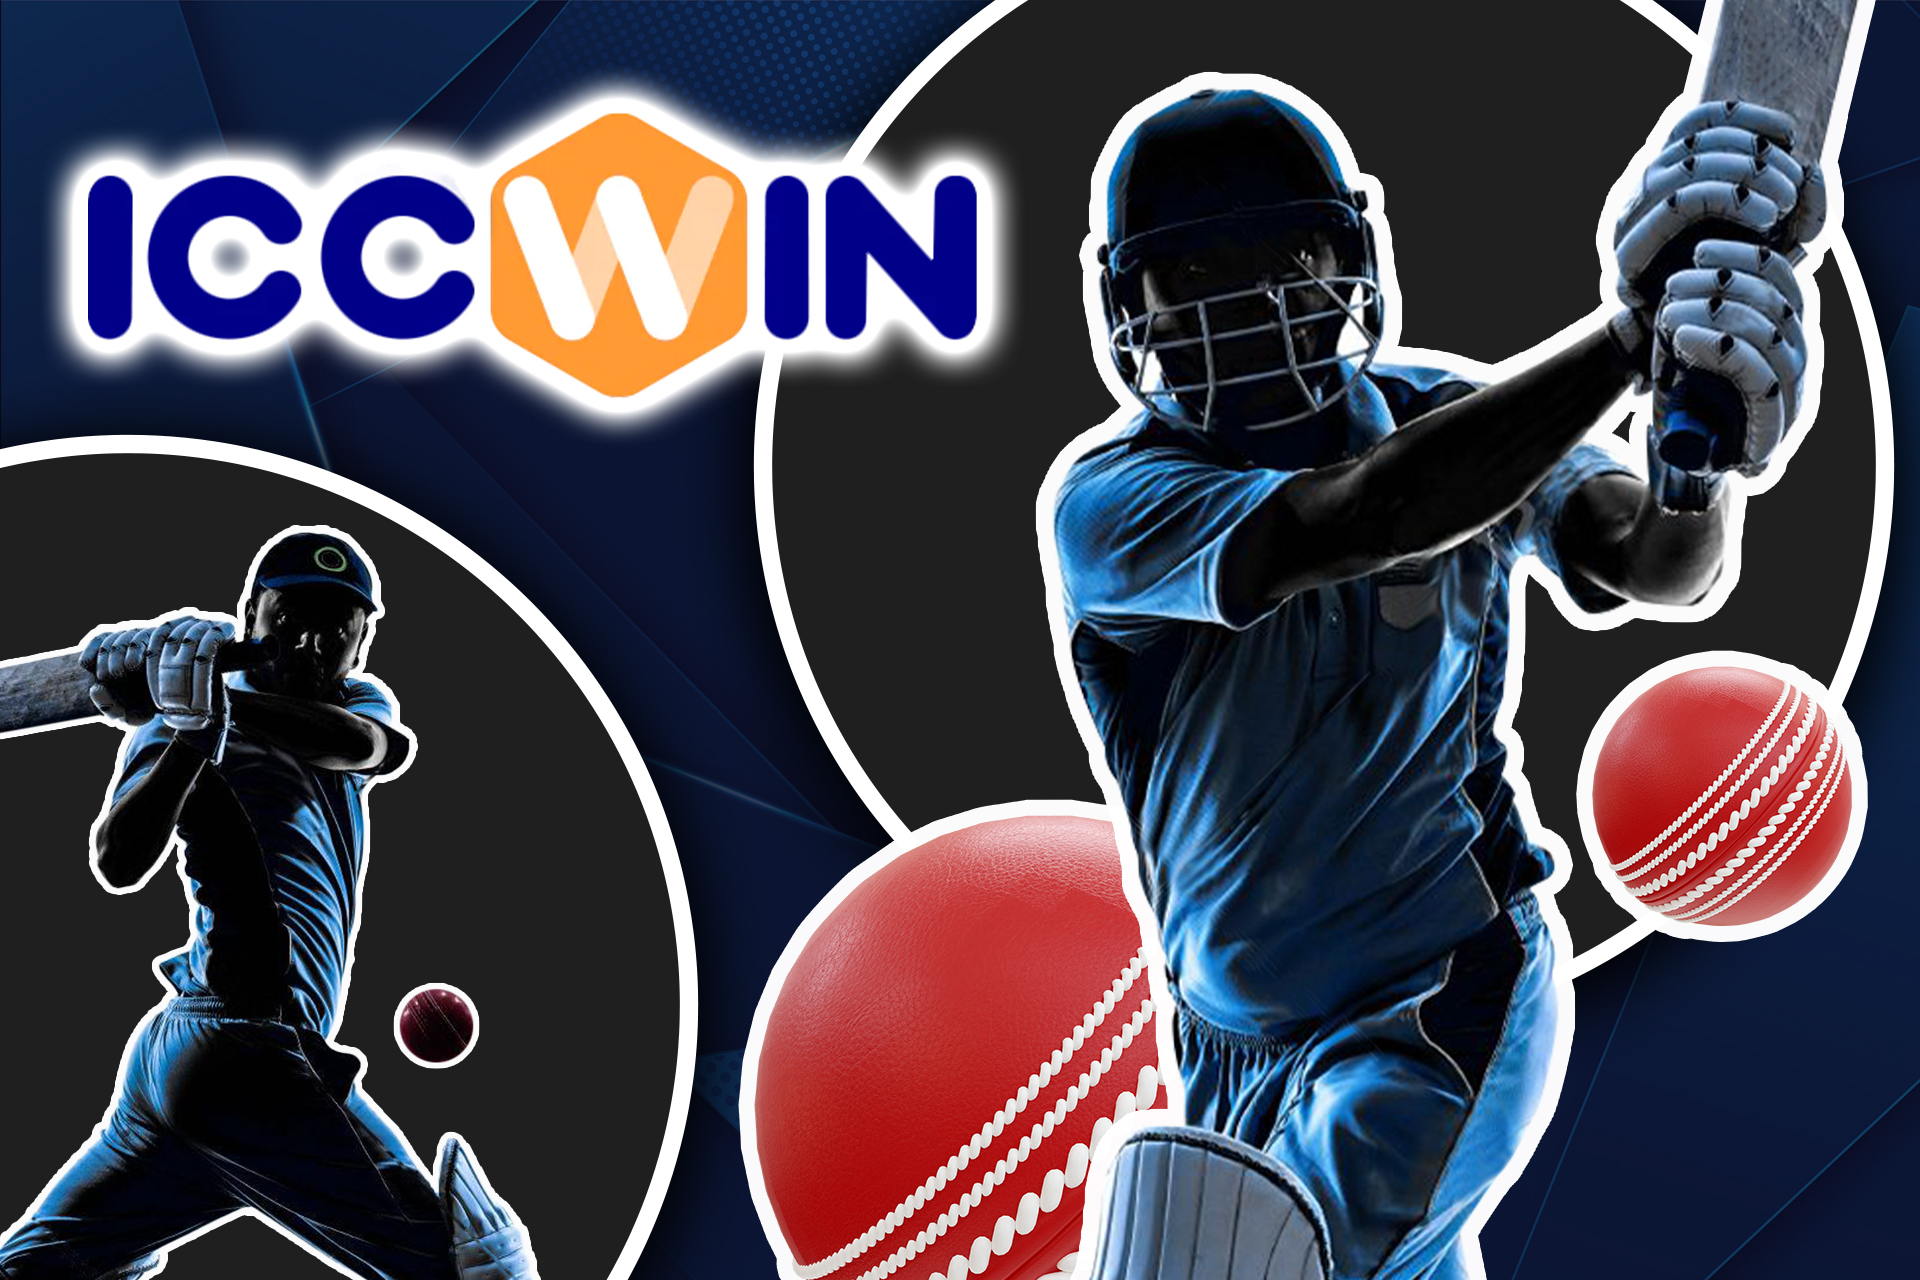 ICCWIN has various cricket leagues and tournaments to bet on.